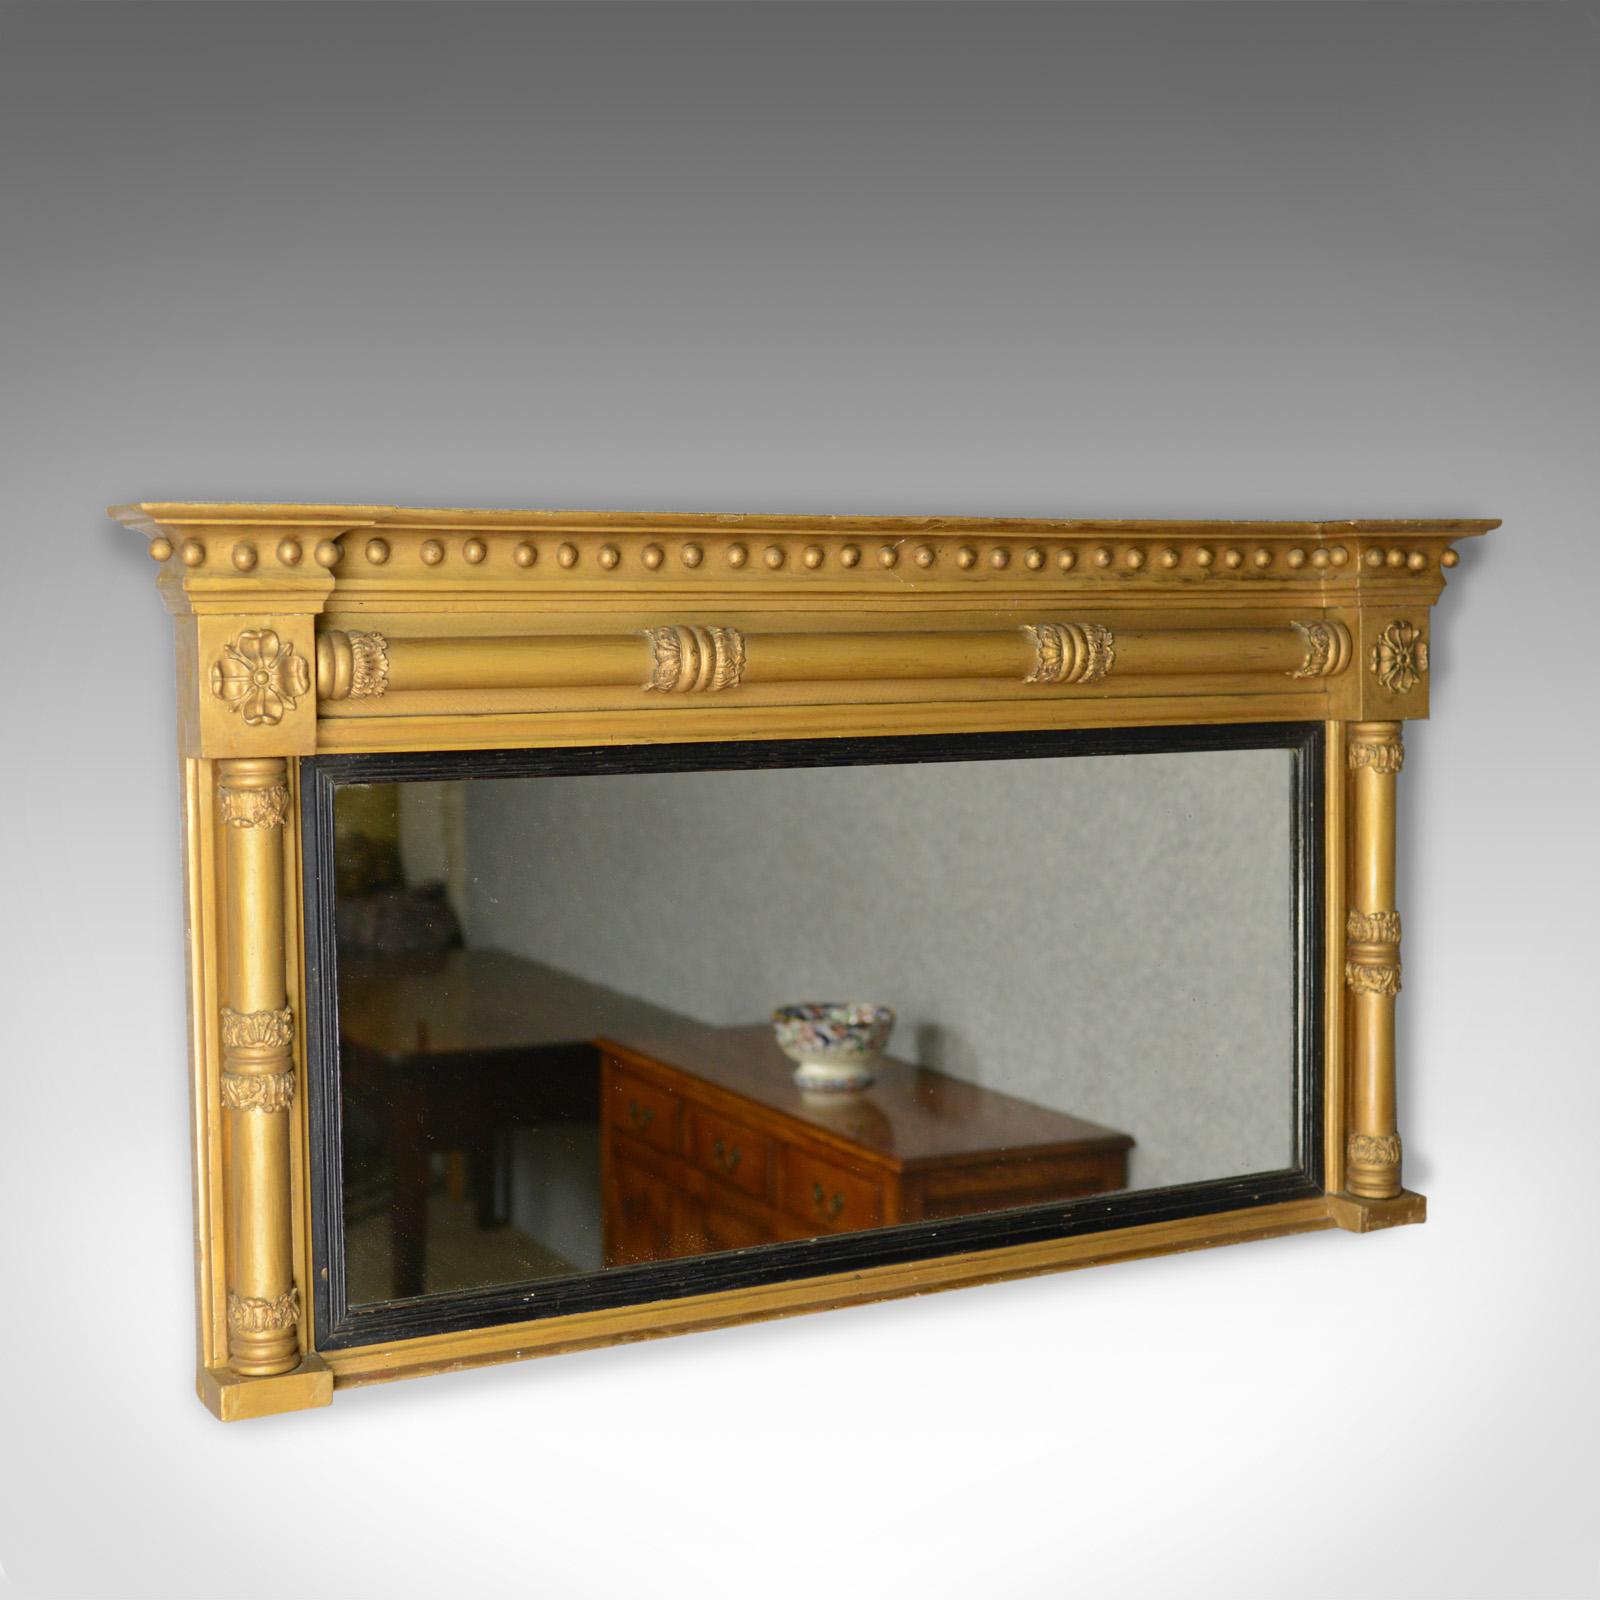 This is an antique overmantel mirror. An English, Georgian, giltwood and gesso wall mirror dating to circa 1800.

Attractive, mellow golden tones in the giltwood and gesso frame
A quality mirror from the late Georgian period
Mid-sized and in